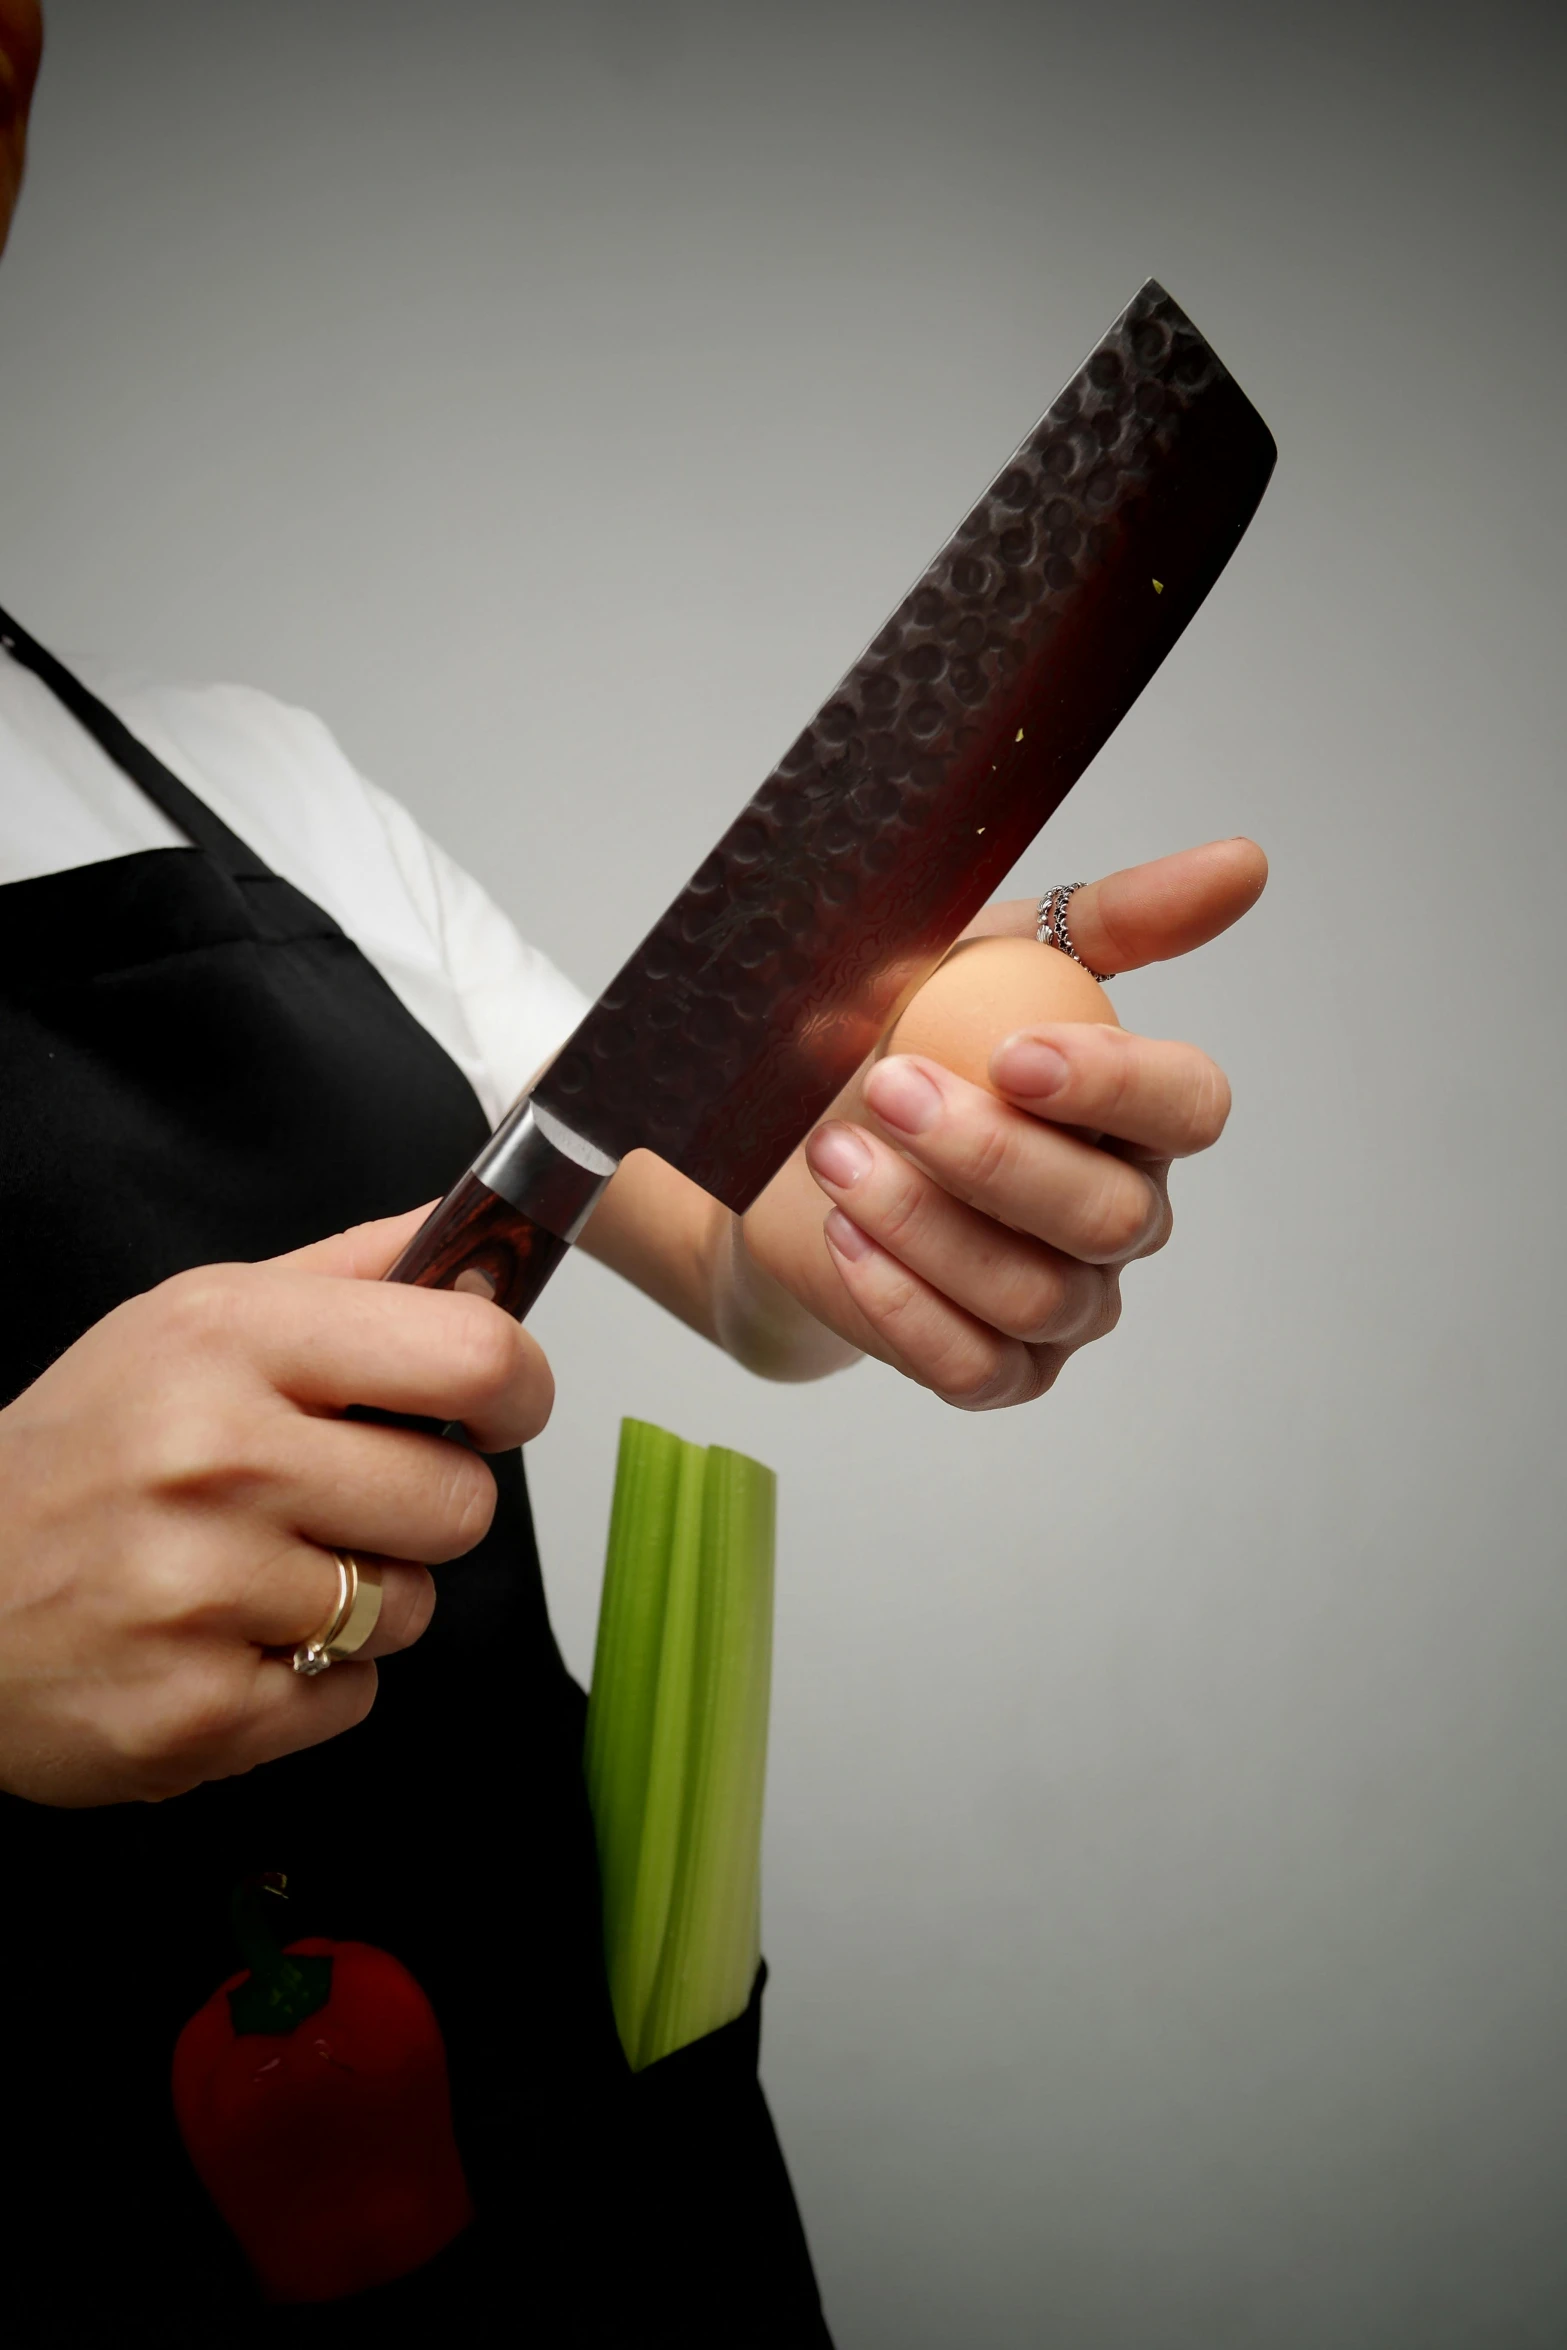 a person with an apron holding a knife near celery